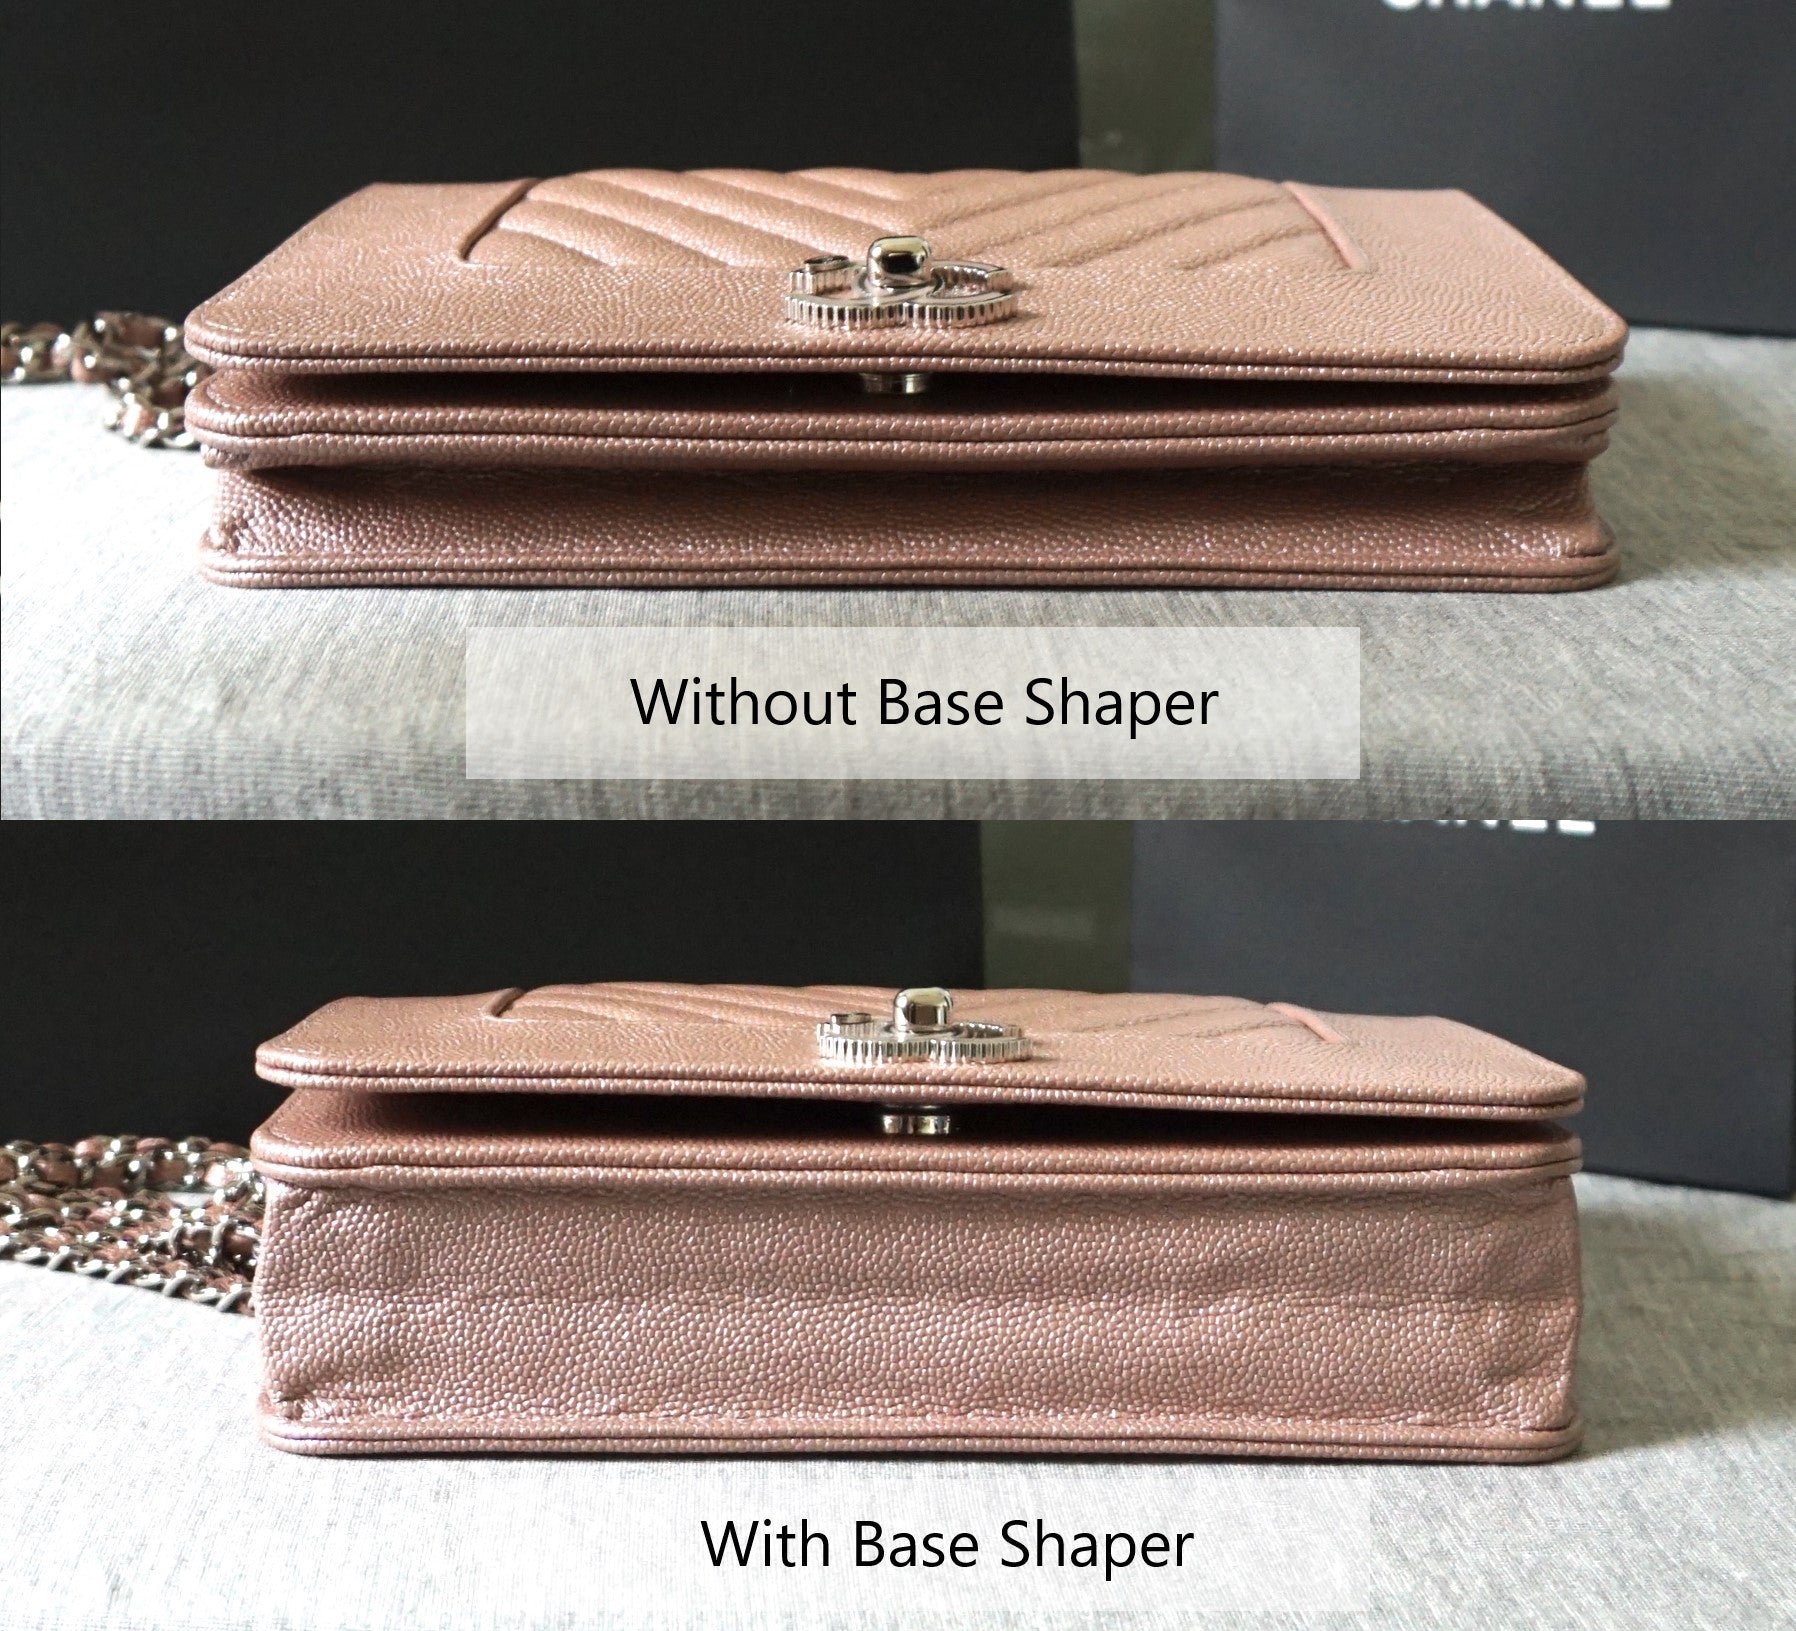 CHANEL WOC + BASE SHAPER // CHECK THE DIFFERENCE 